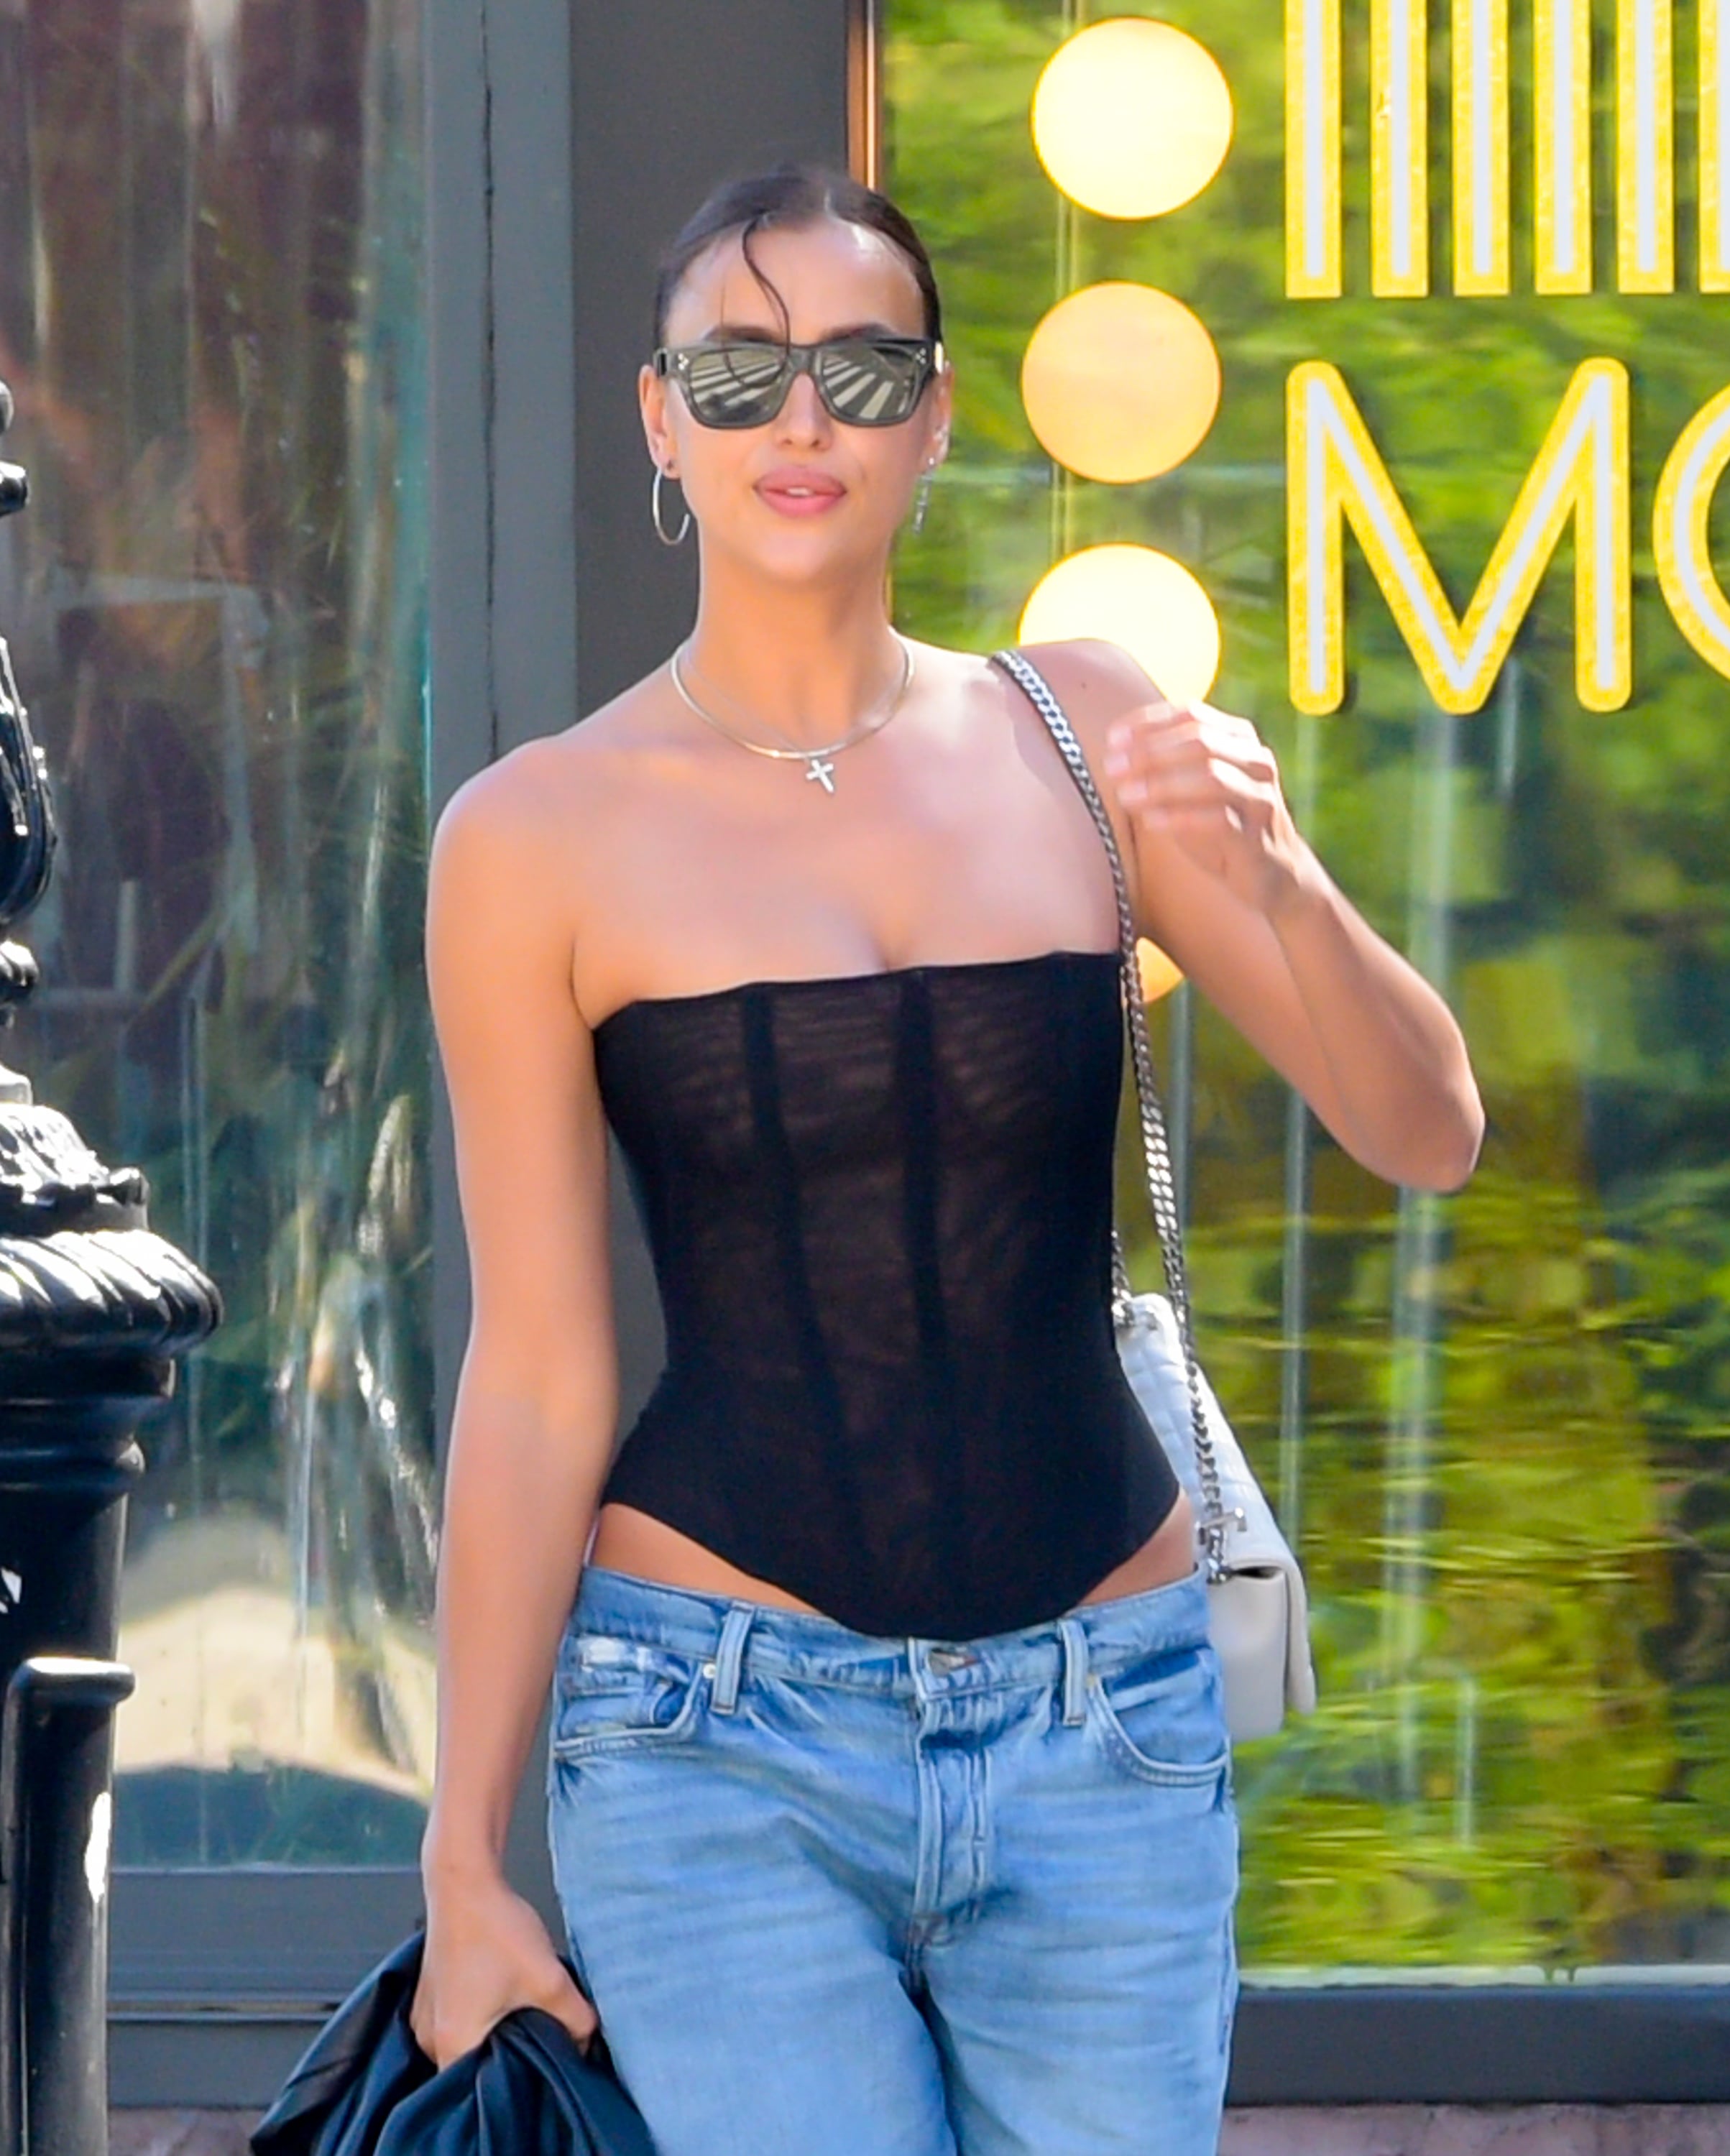 Irina Shayk Wearing Low-Rise Cargo Pants and a Bustier Top